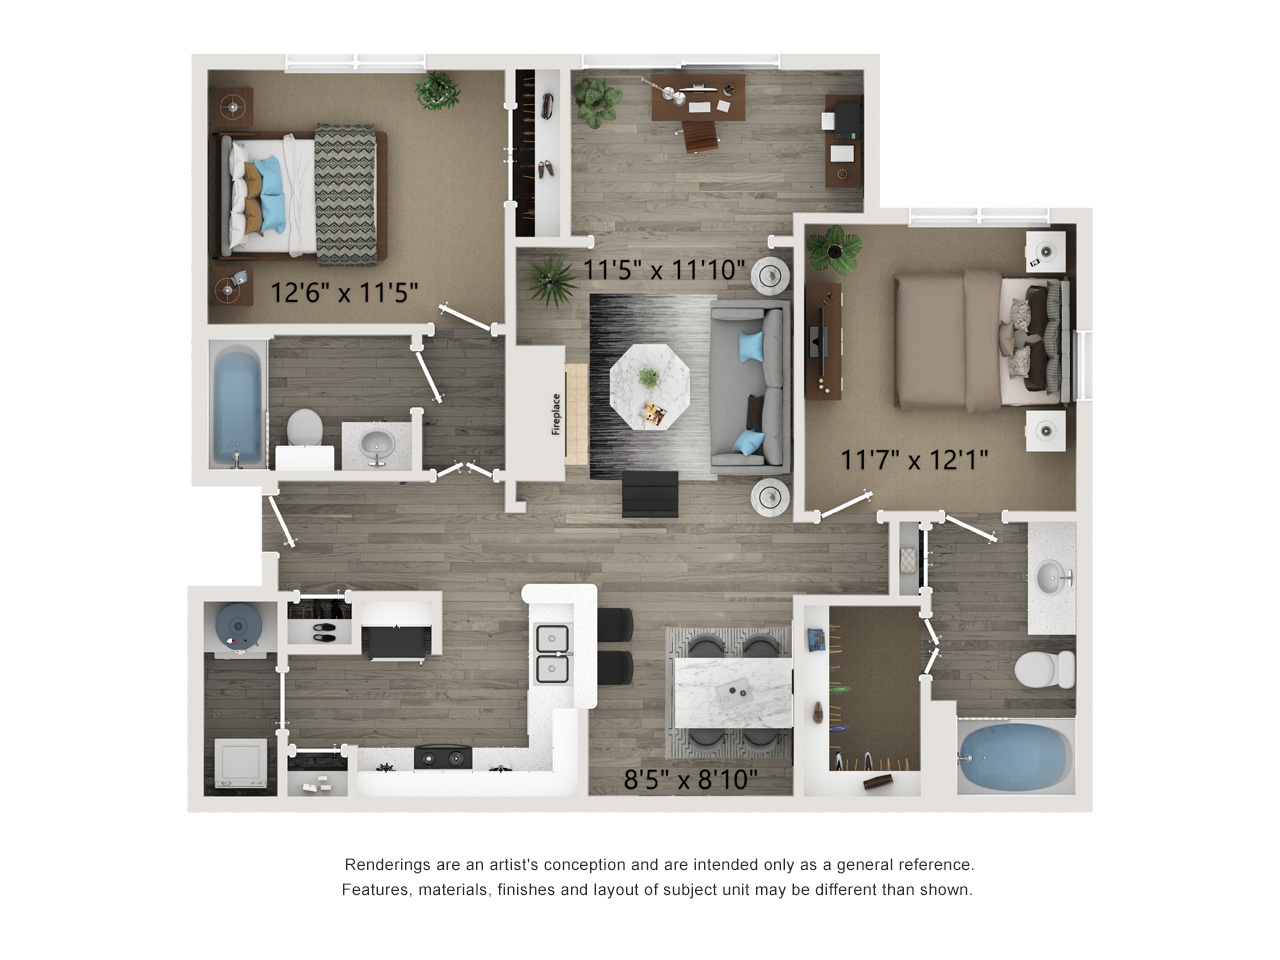 two bed two bath 1,088 square foot floor plan